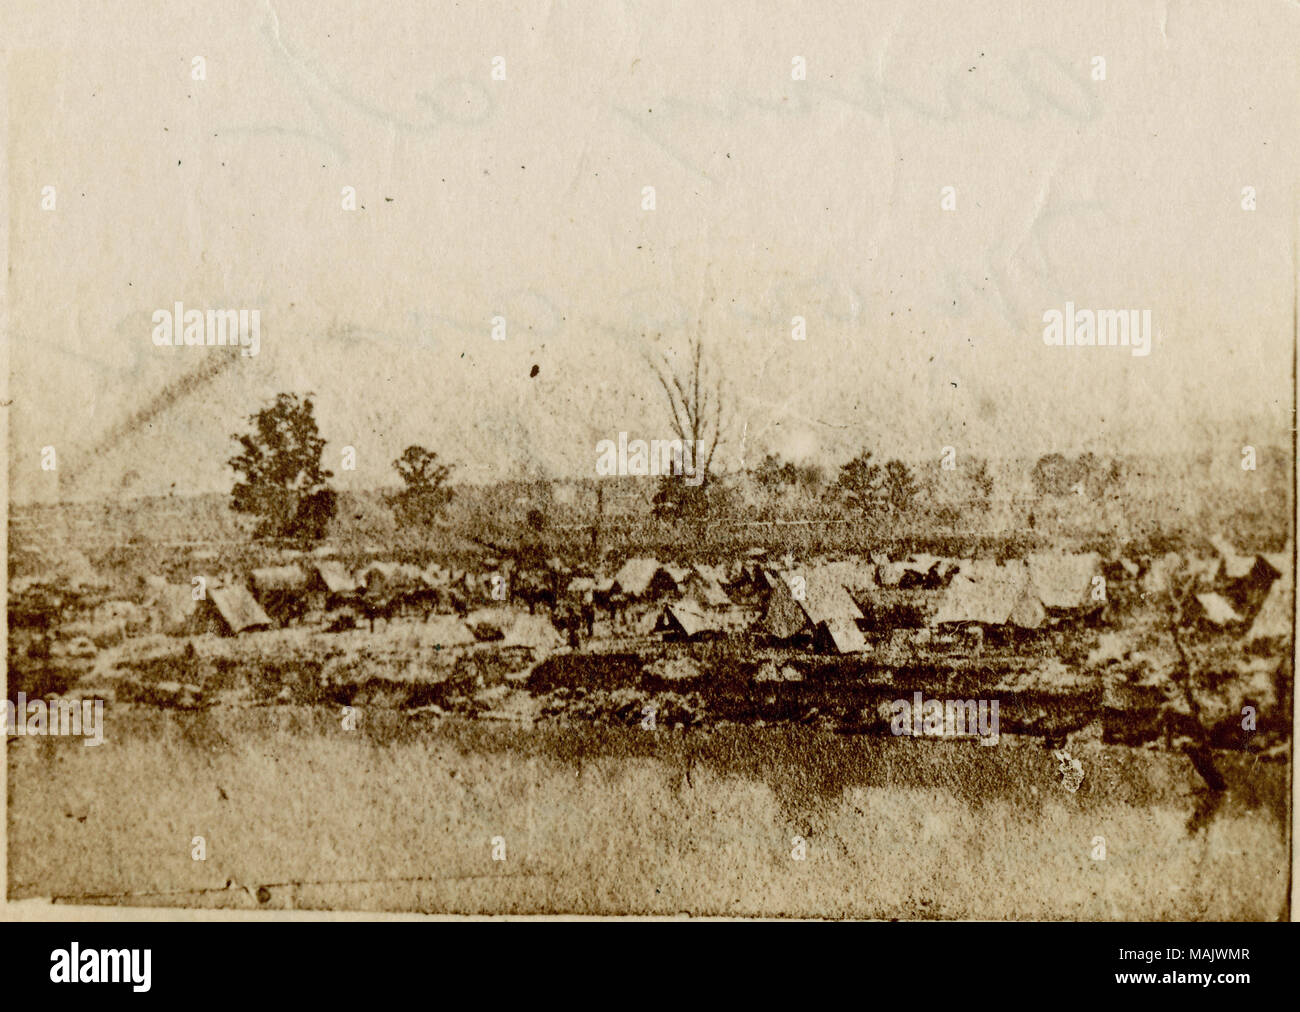 Photograph of campsite with tents in the foreground and trees in the background. 'Union Army at Morganza Bend, Louisiana' and 'Gift of John H. Gundlack.' (written on reverse side). Title: 'Union Camp, Morganza Bend, LA.'  . between 1861 and 1865. Stock Photo